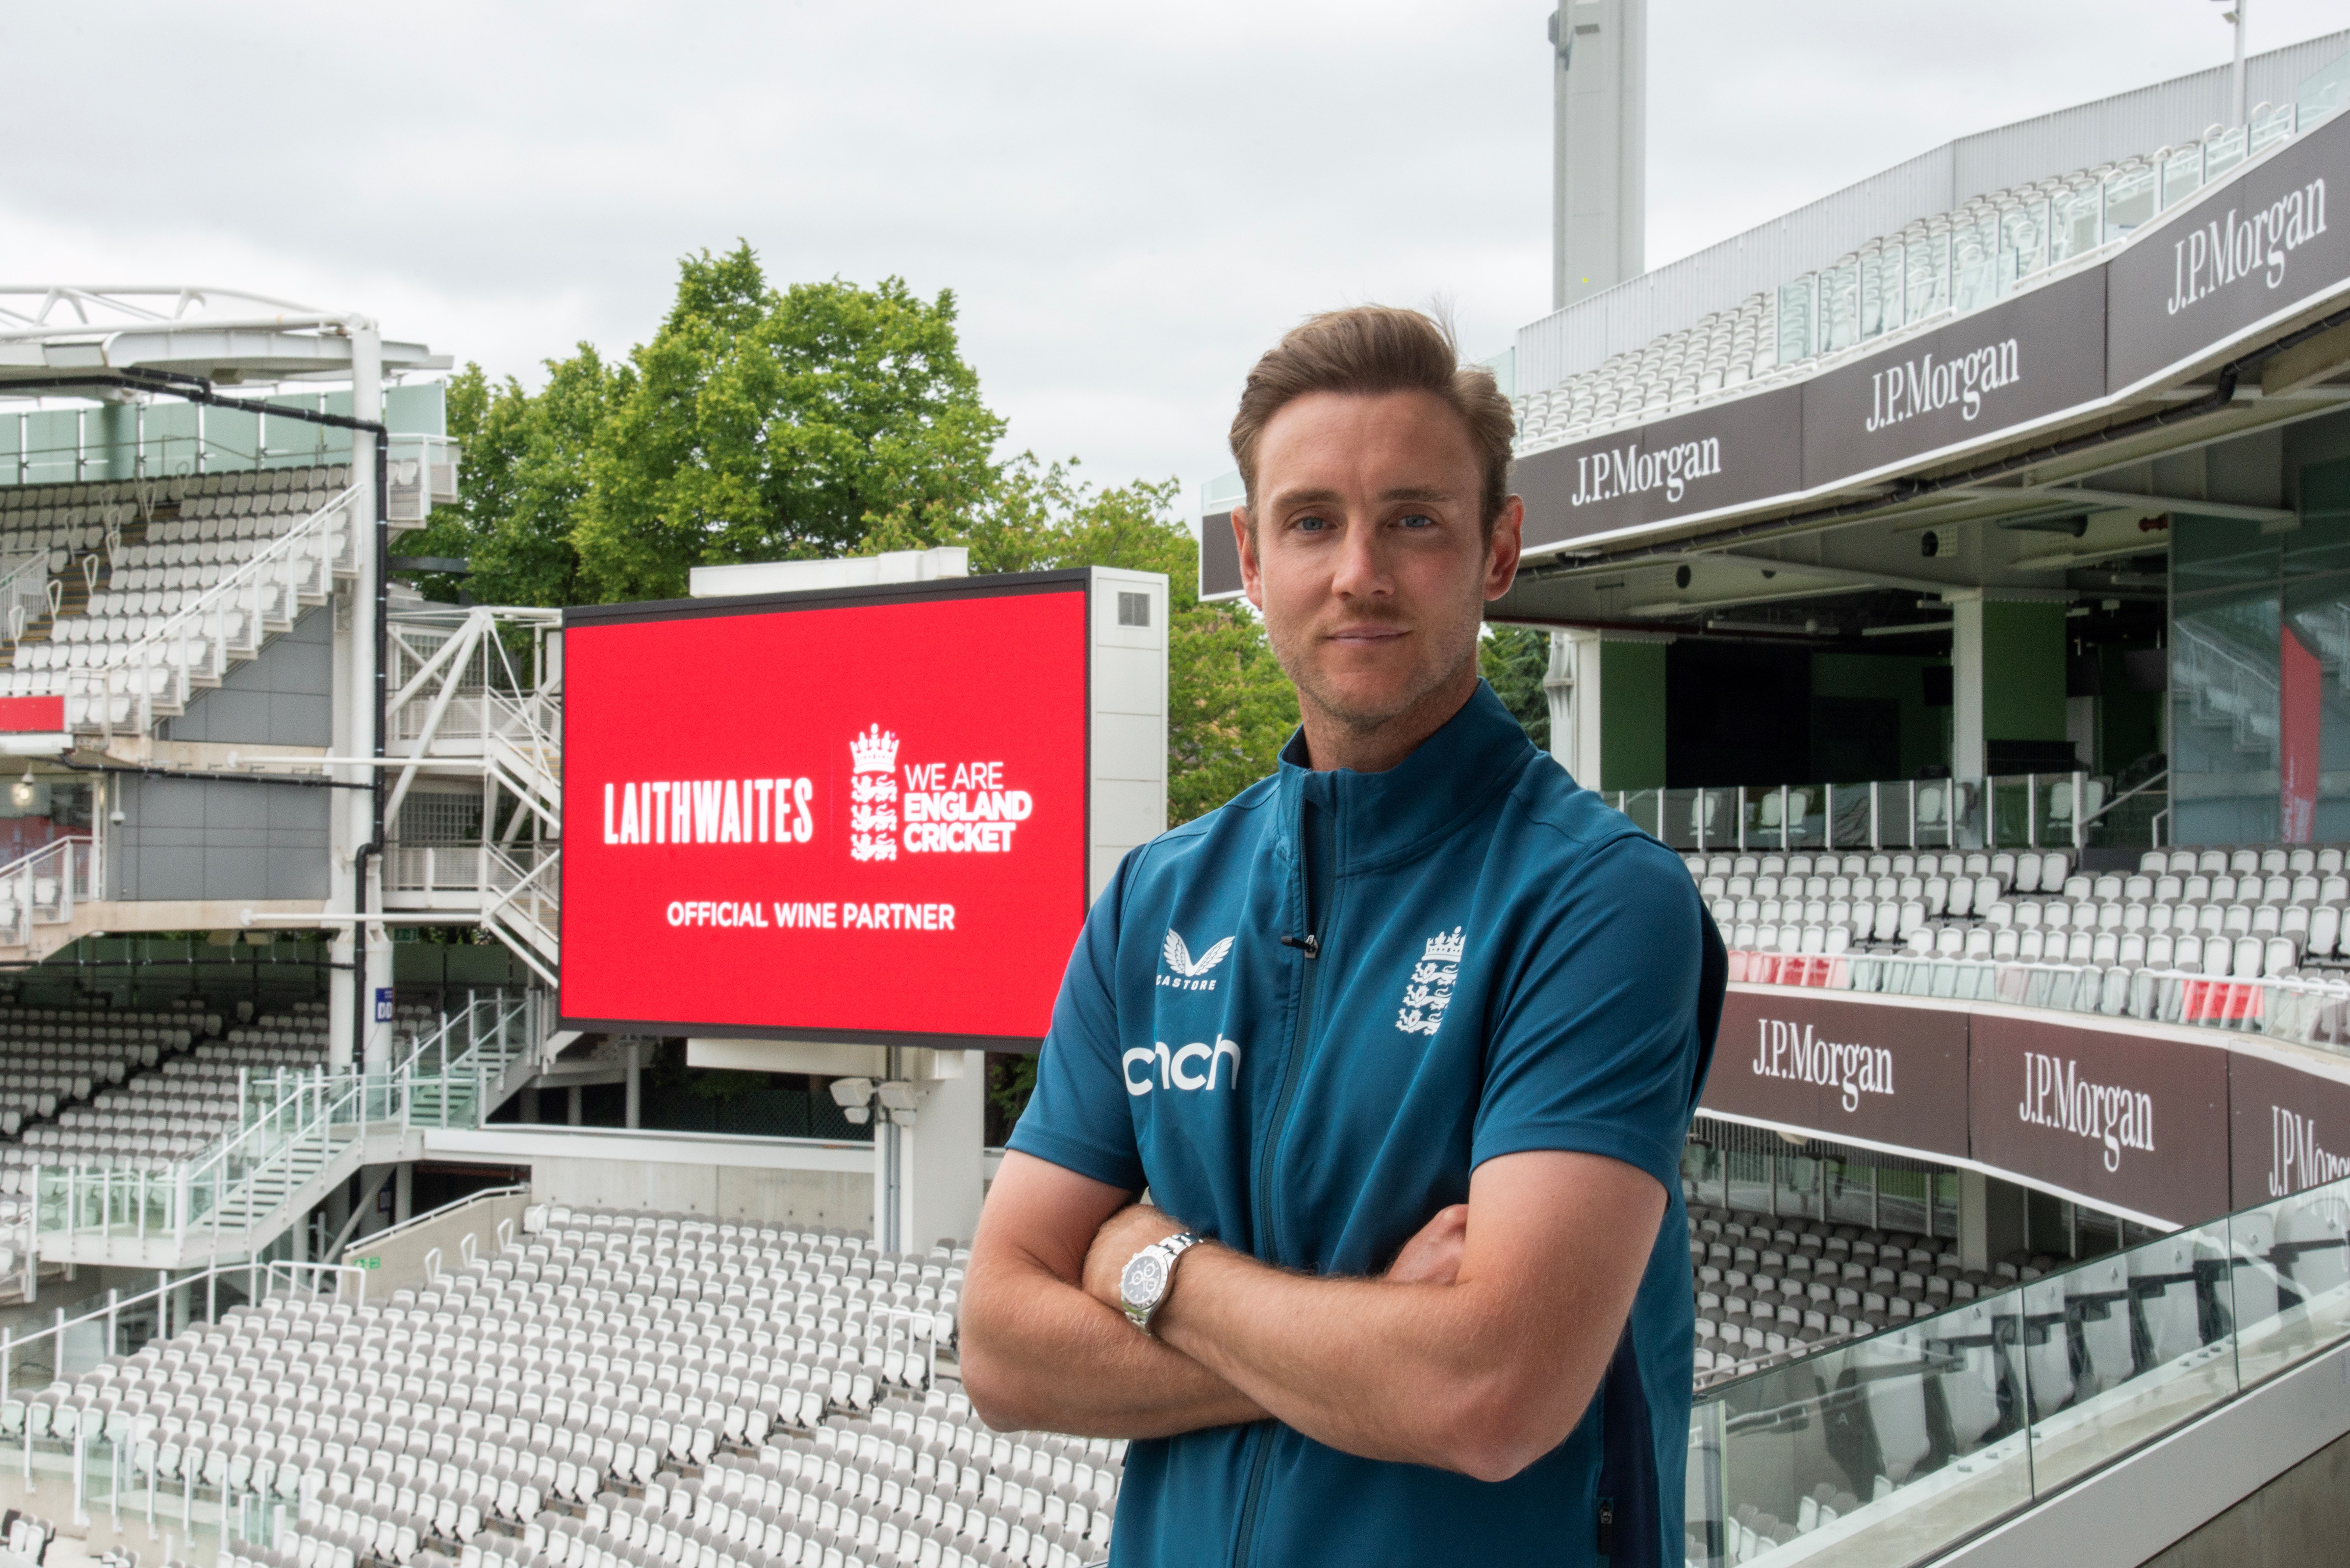 Stuart Broad is hoping Andy Flower keeps some of England's secrets to himself.